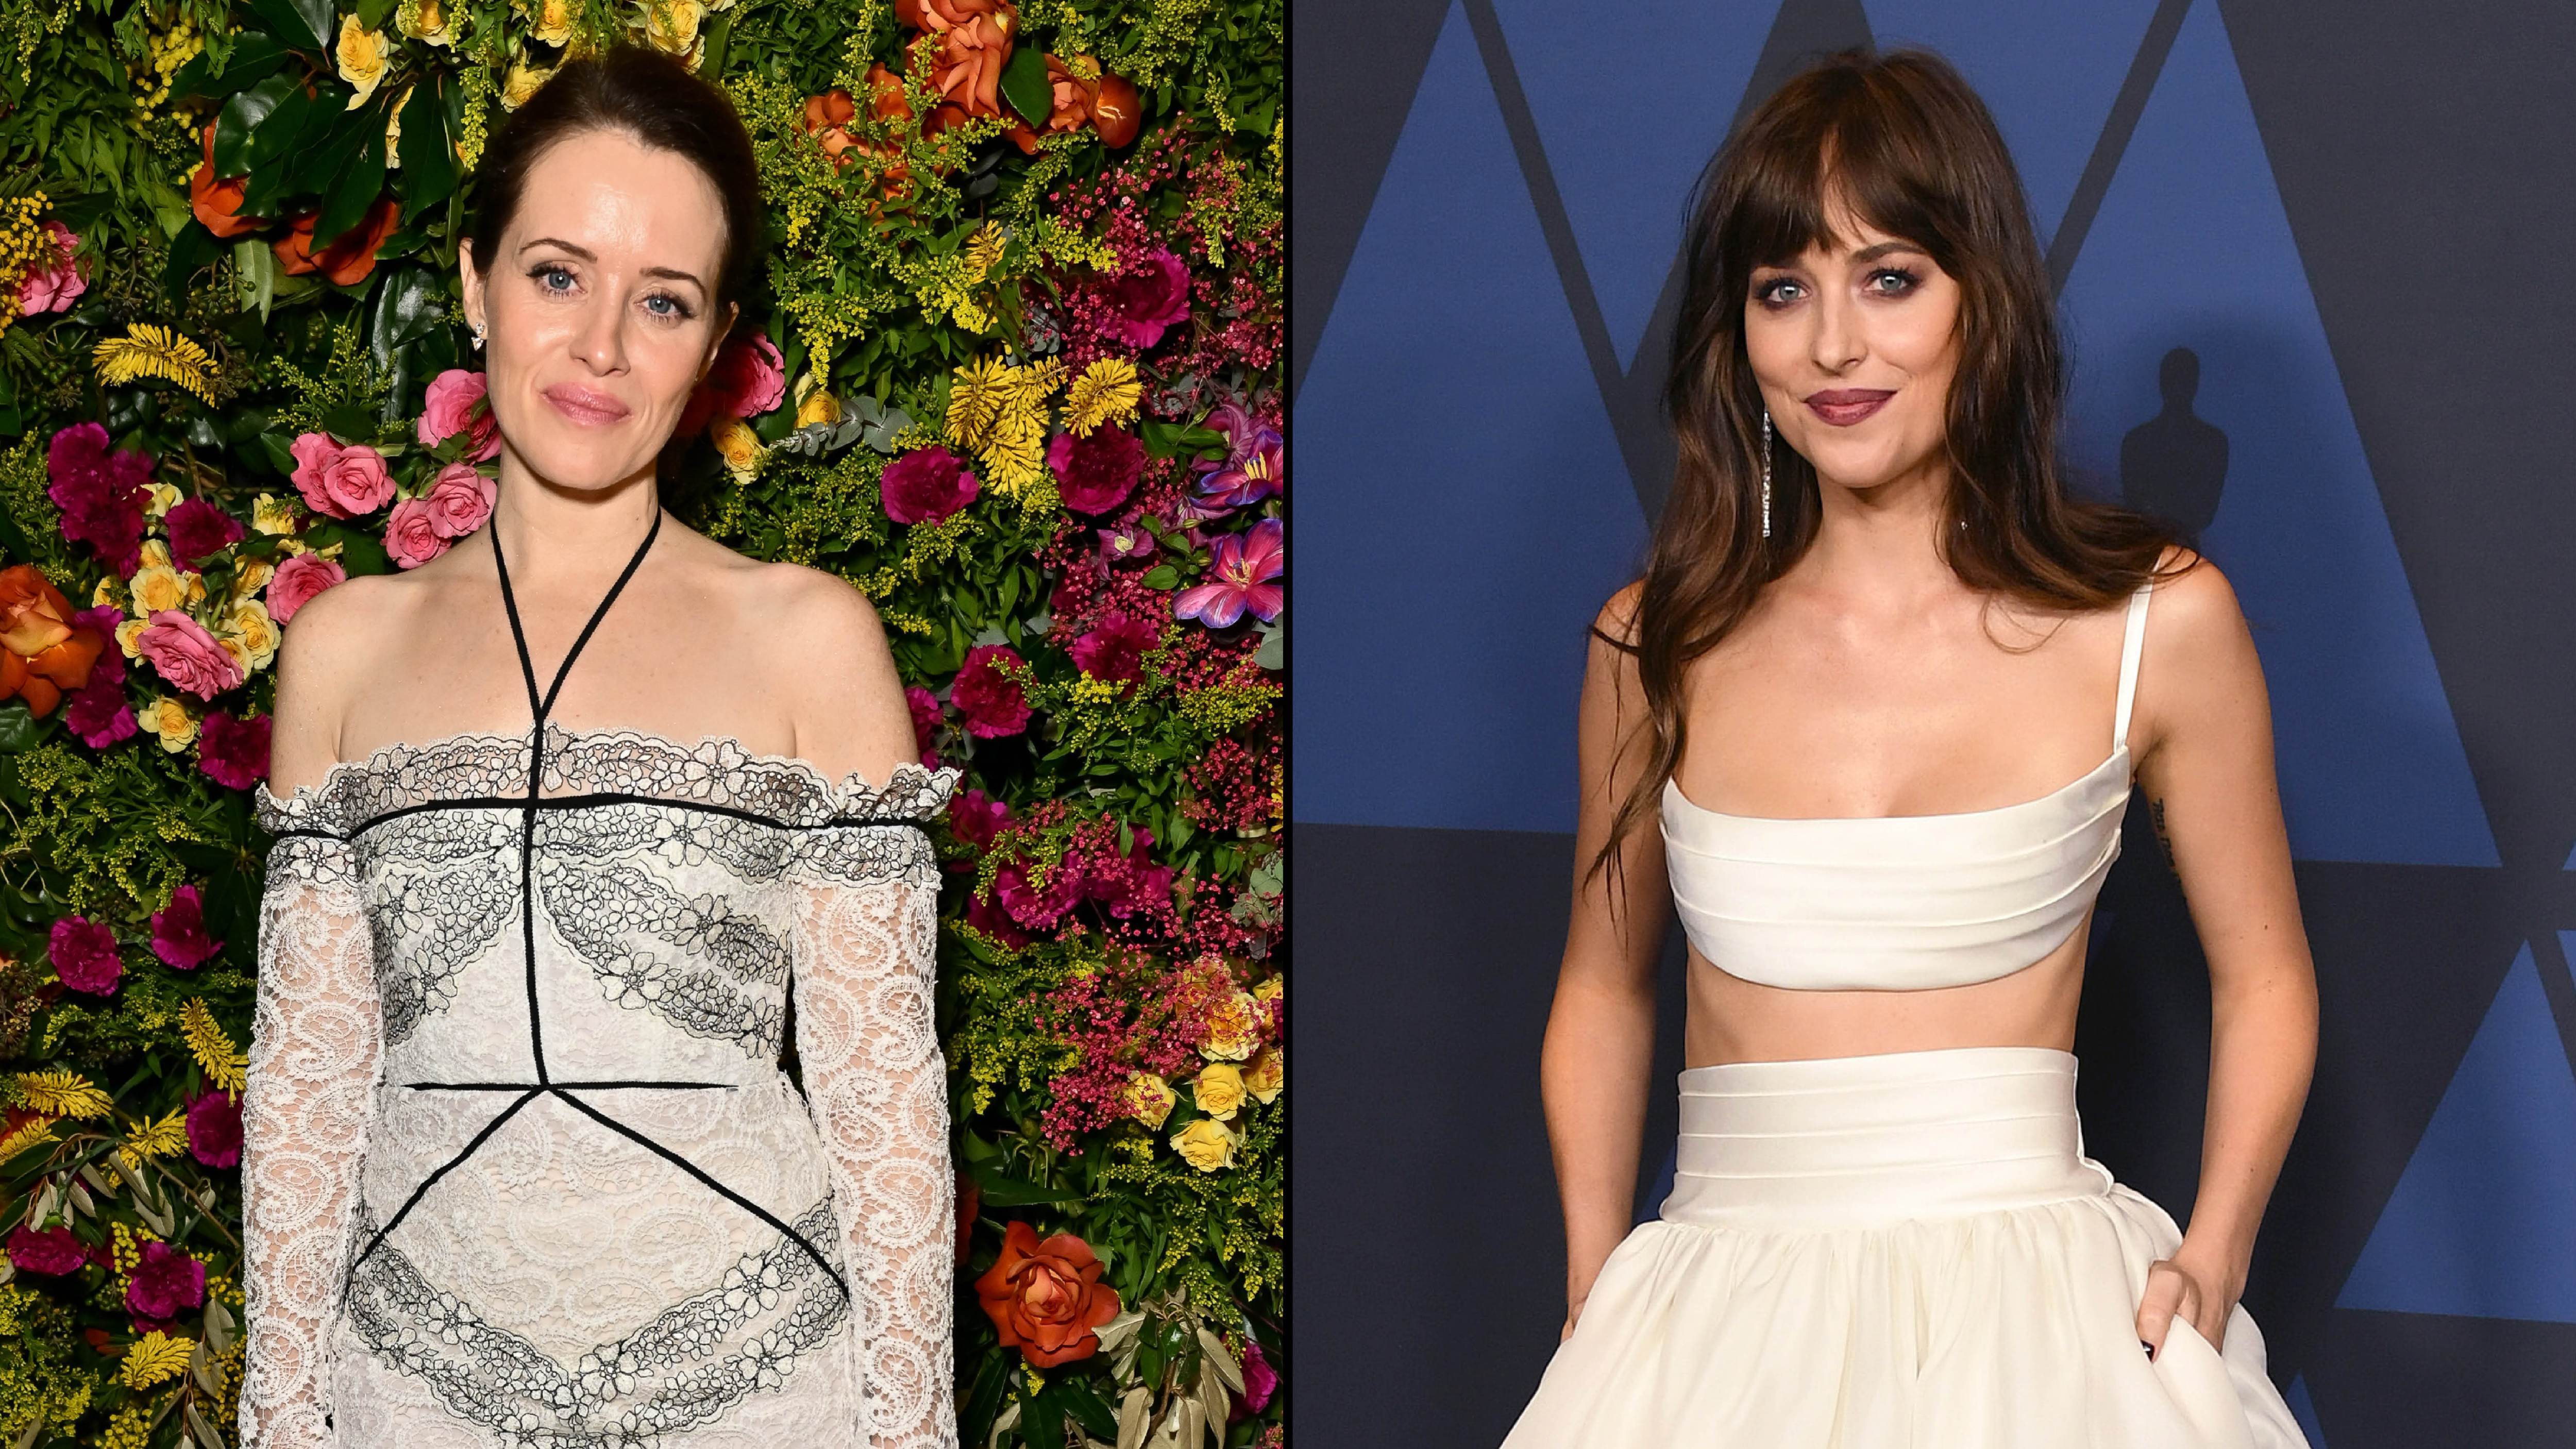 Claire Foy recalled the harsh treatment she endured on her first TV job, while Dakota Johnson said scary experiences taught her about resilience